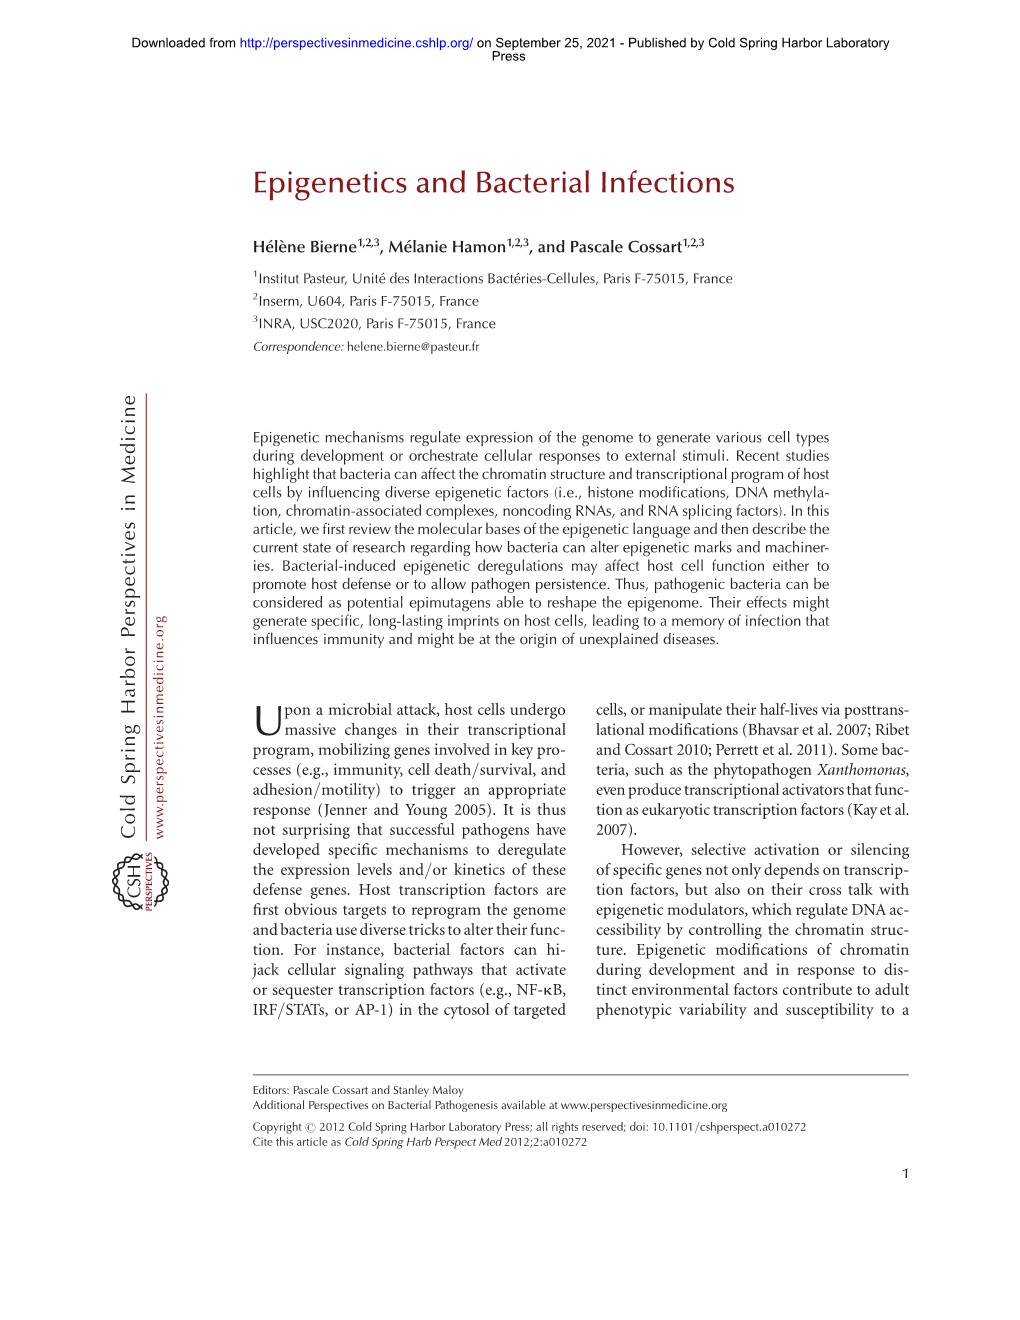 Epigenetics and Bacterial Infections